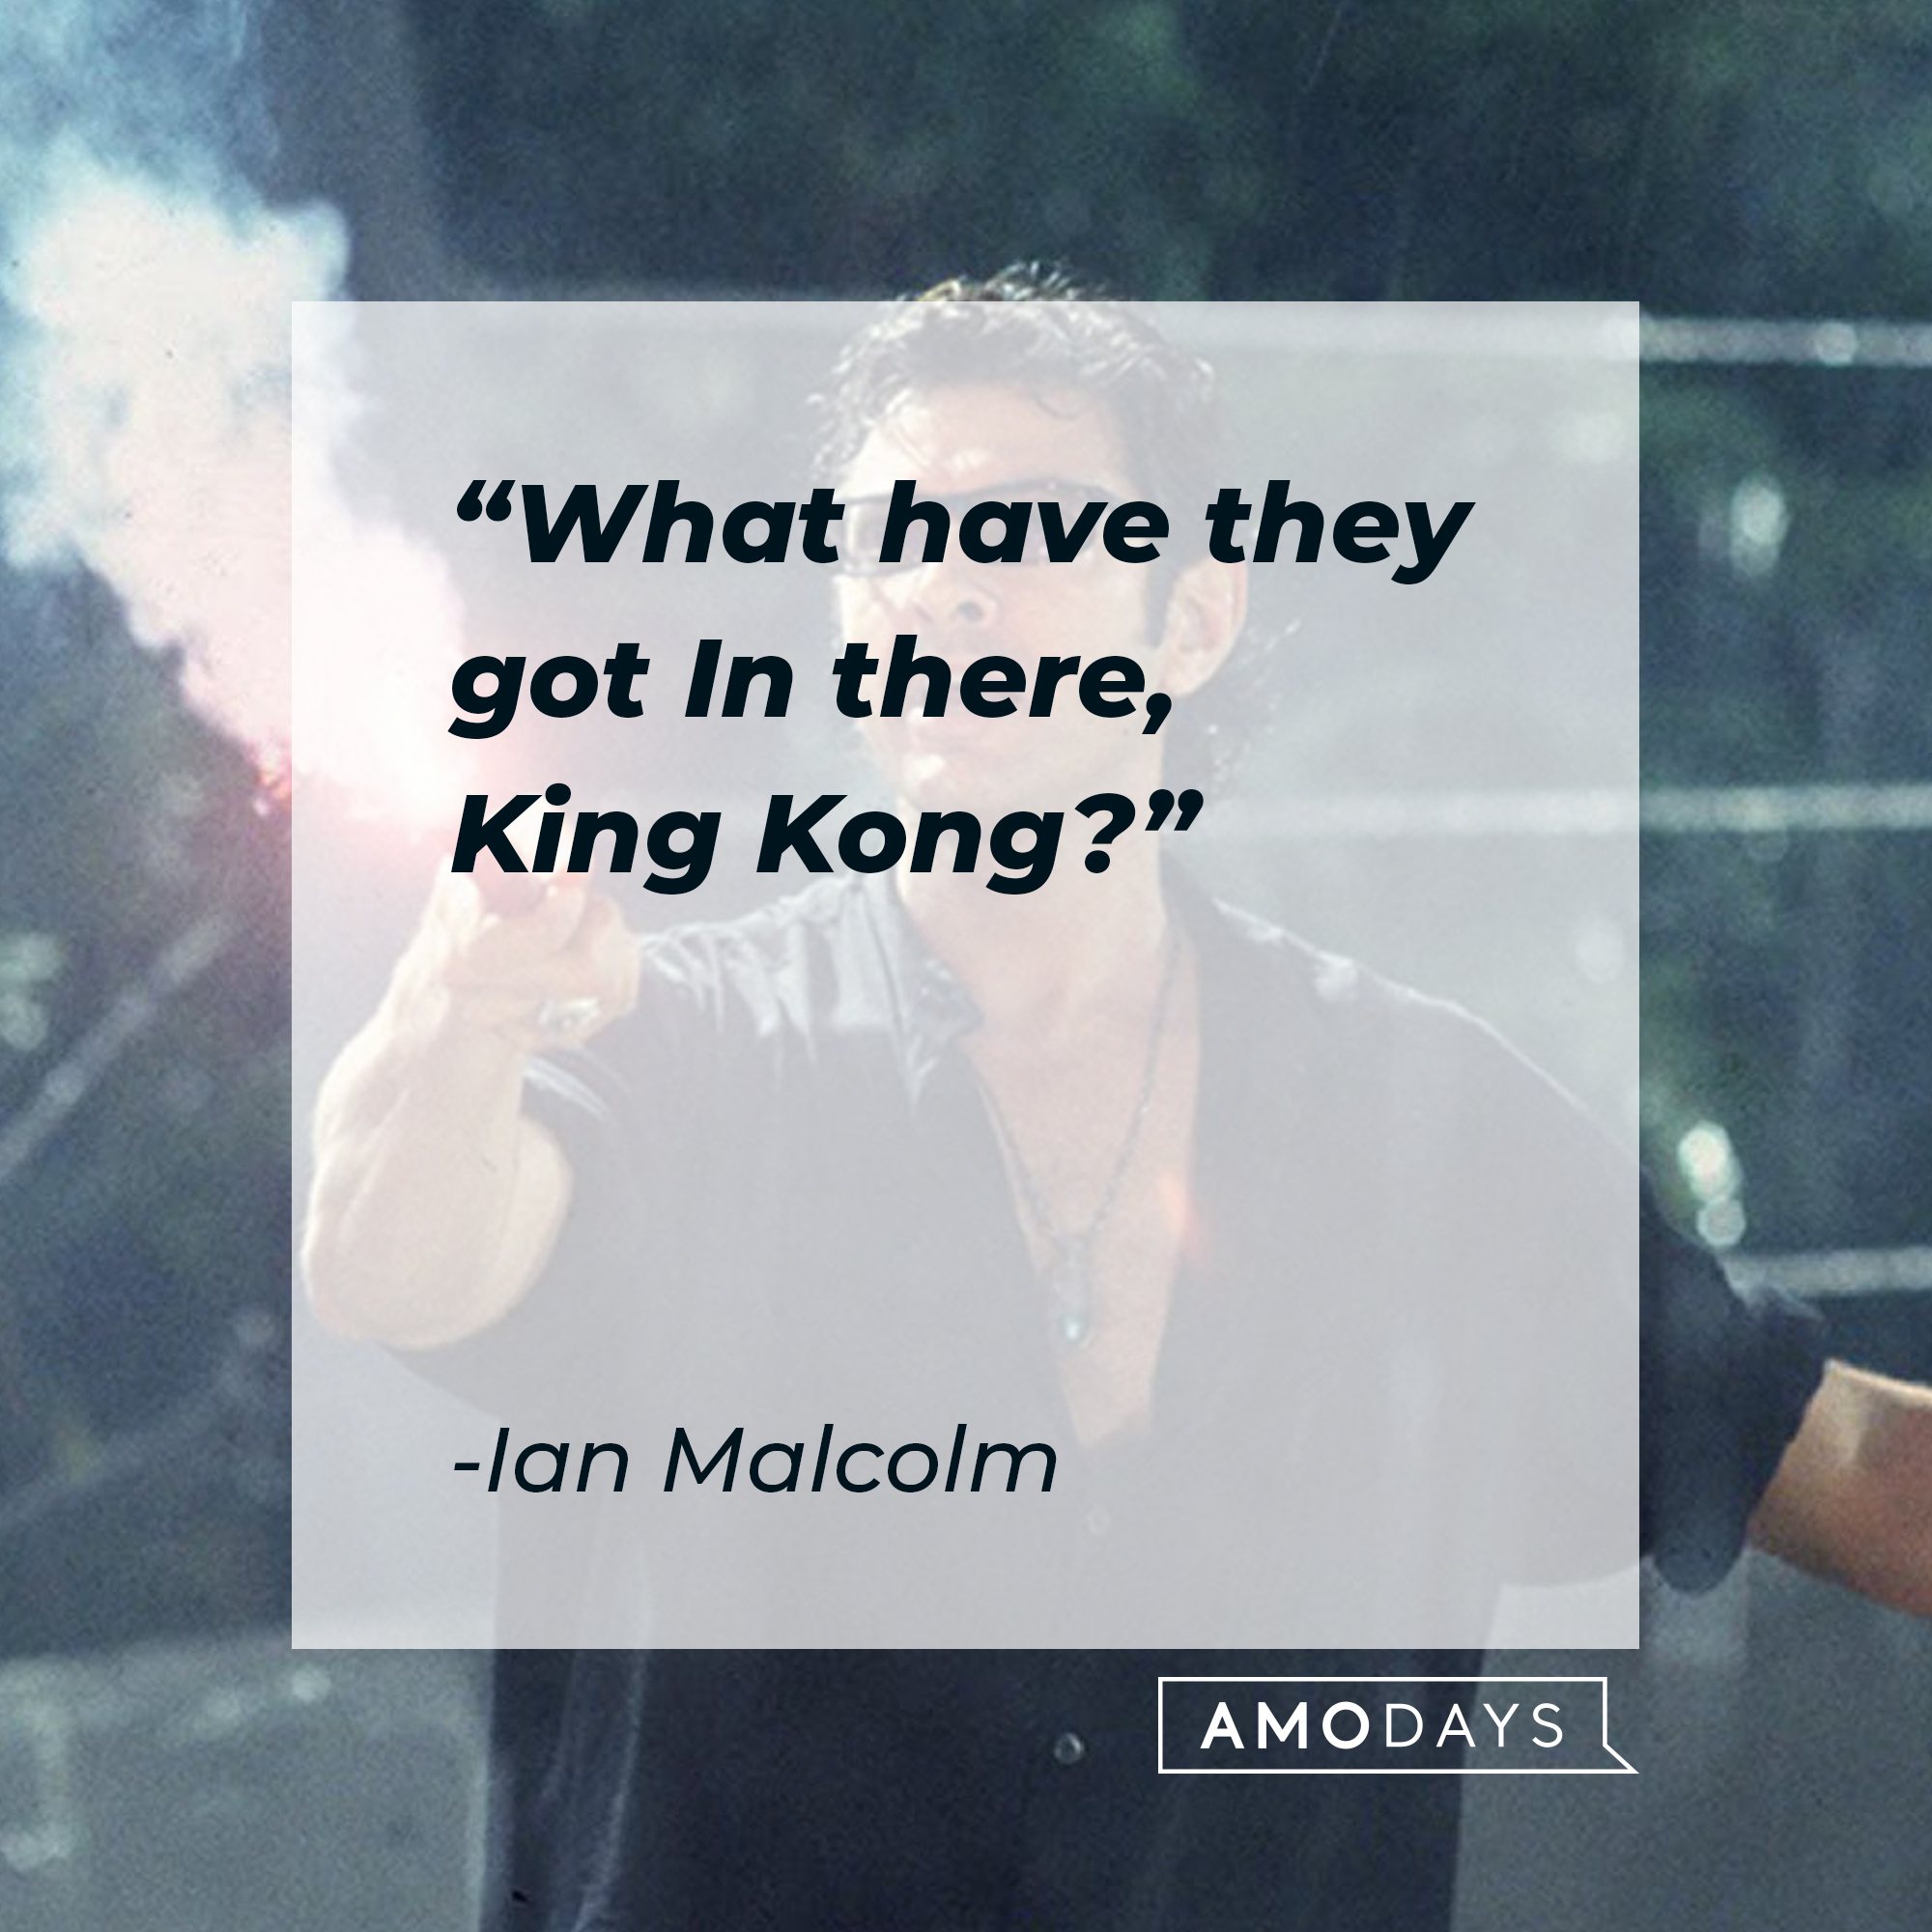 An image of Ian Malcolm with his quote: "What have they got In there, King Kong?" | Source: Facebook.com/JurassicWorld